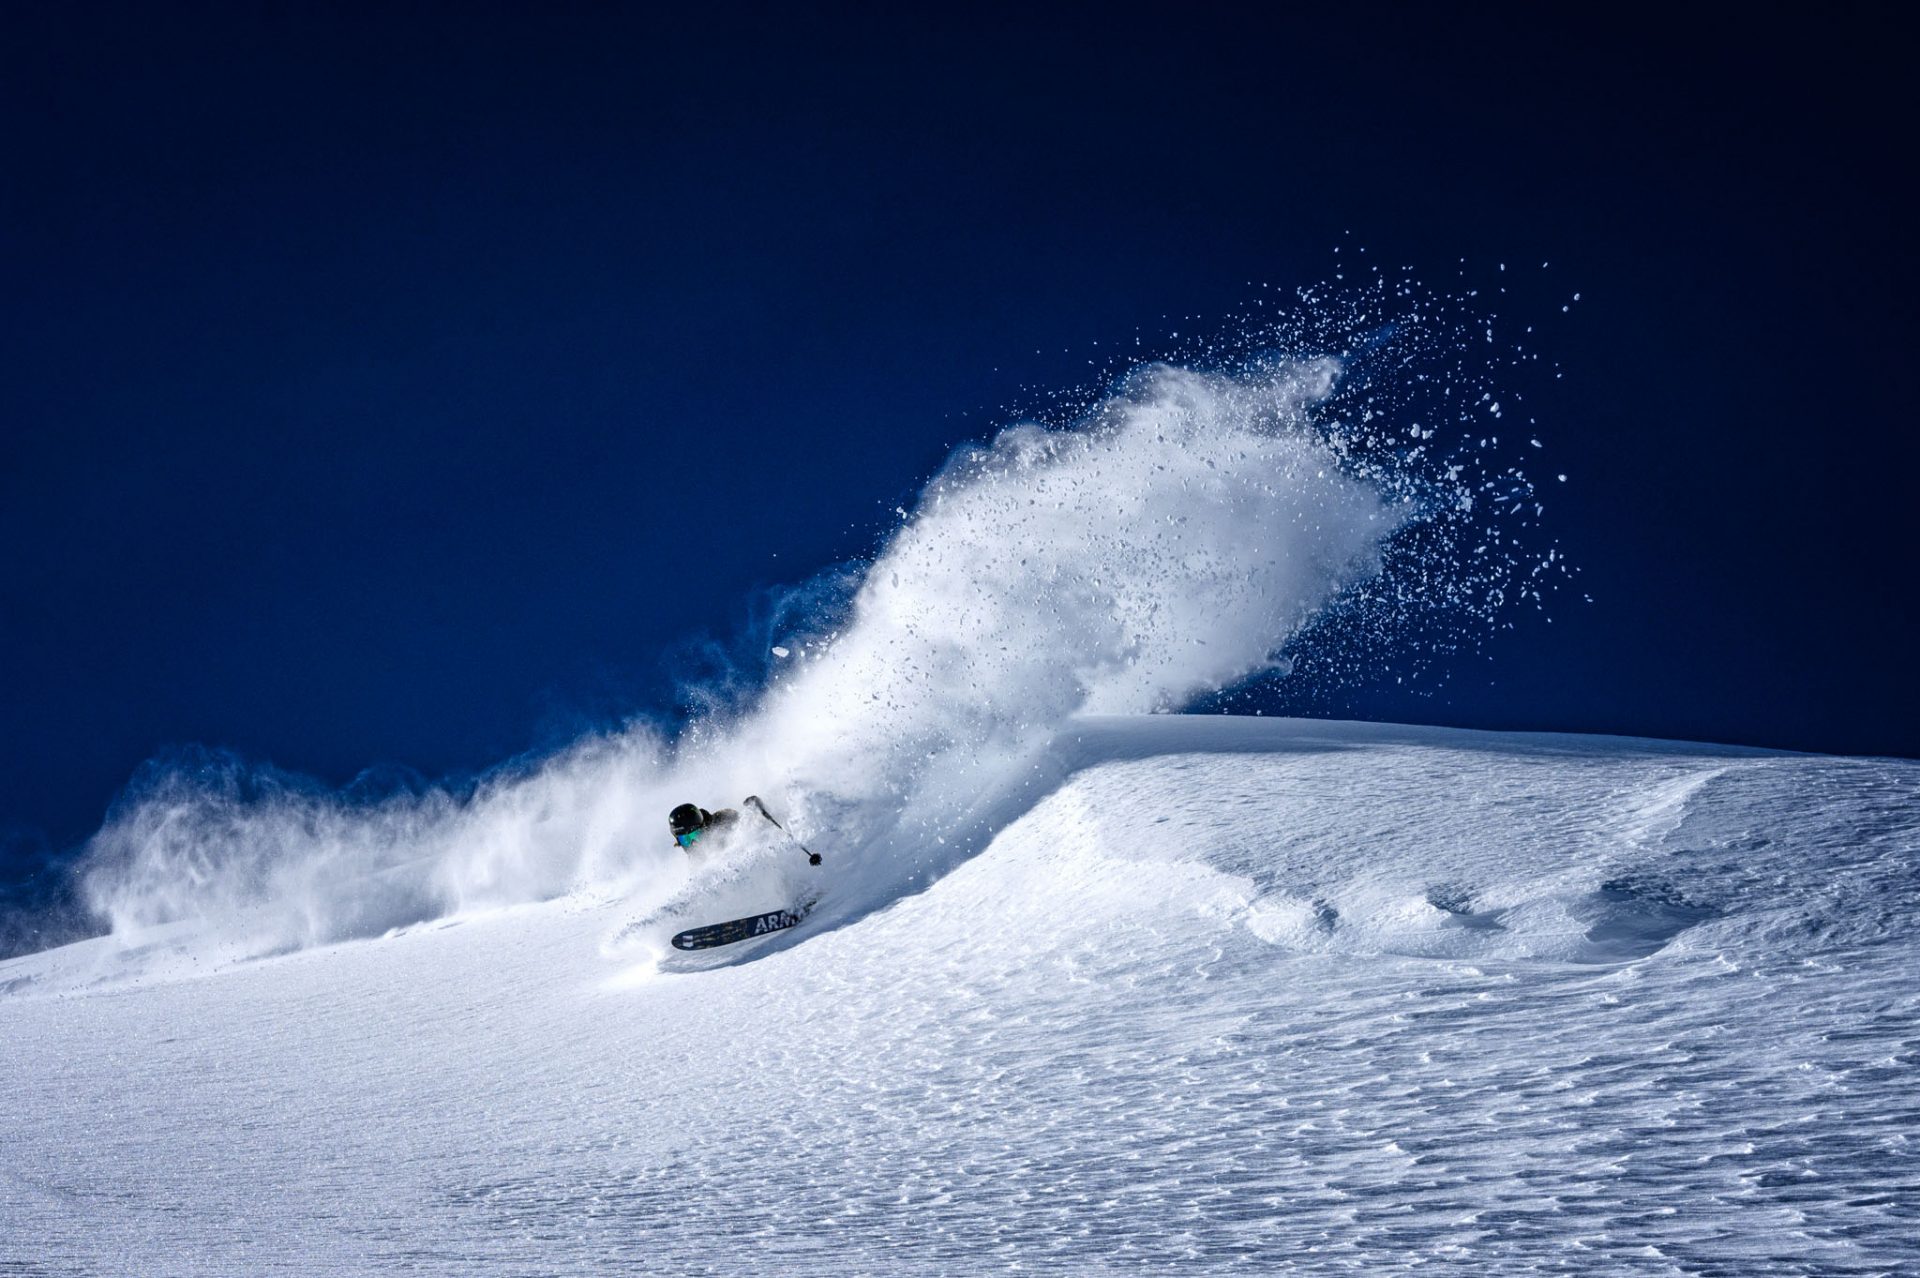 Sammy Carlson blasting a pow turn while filming for North of Now.